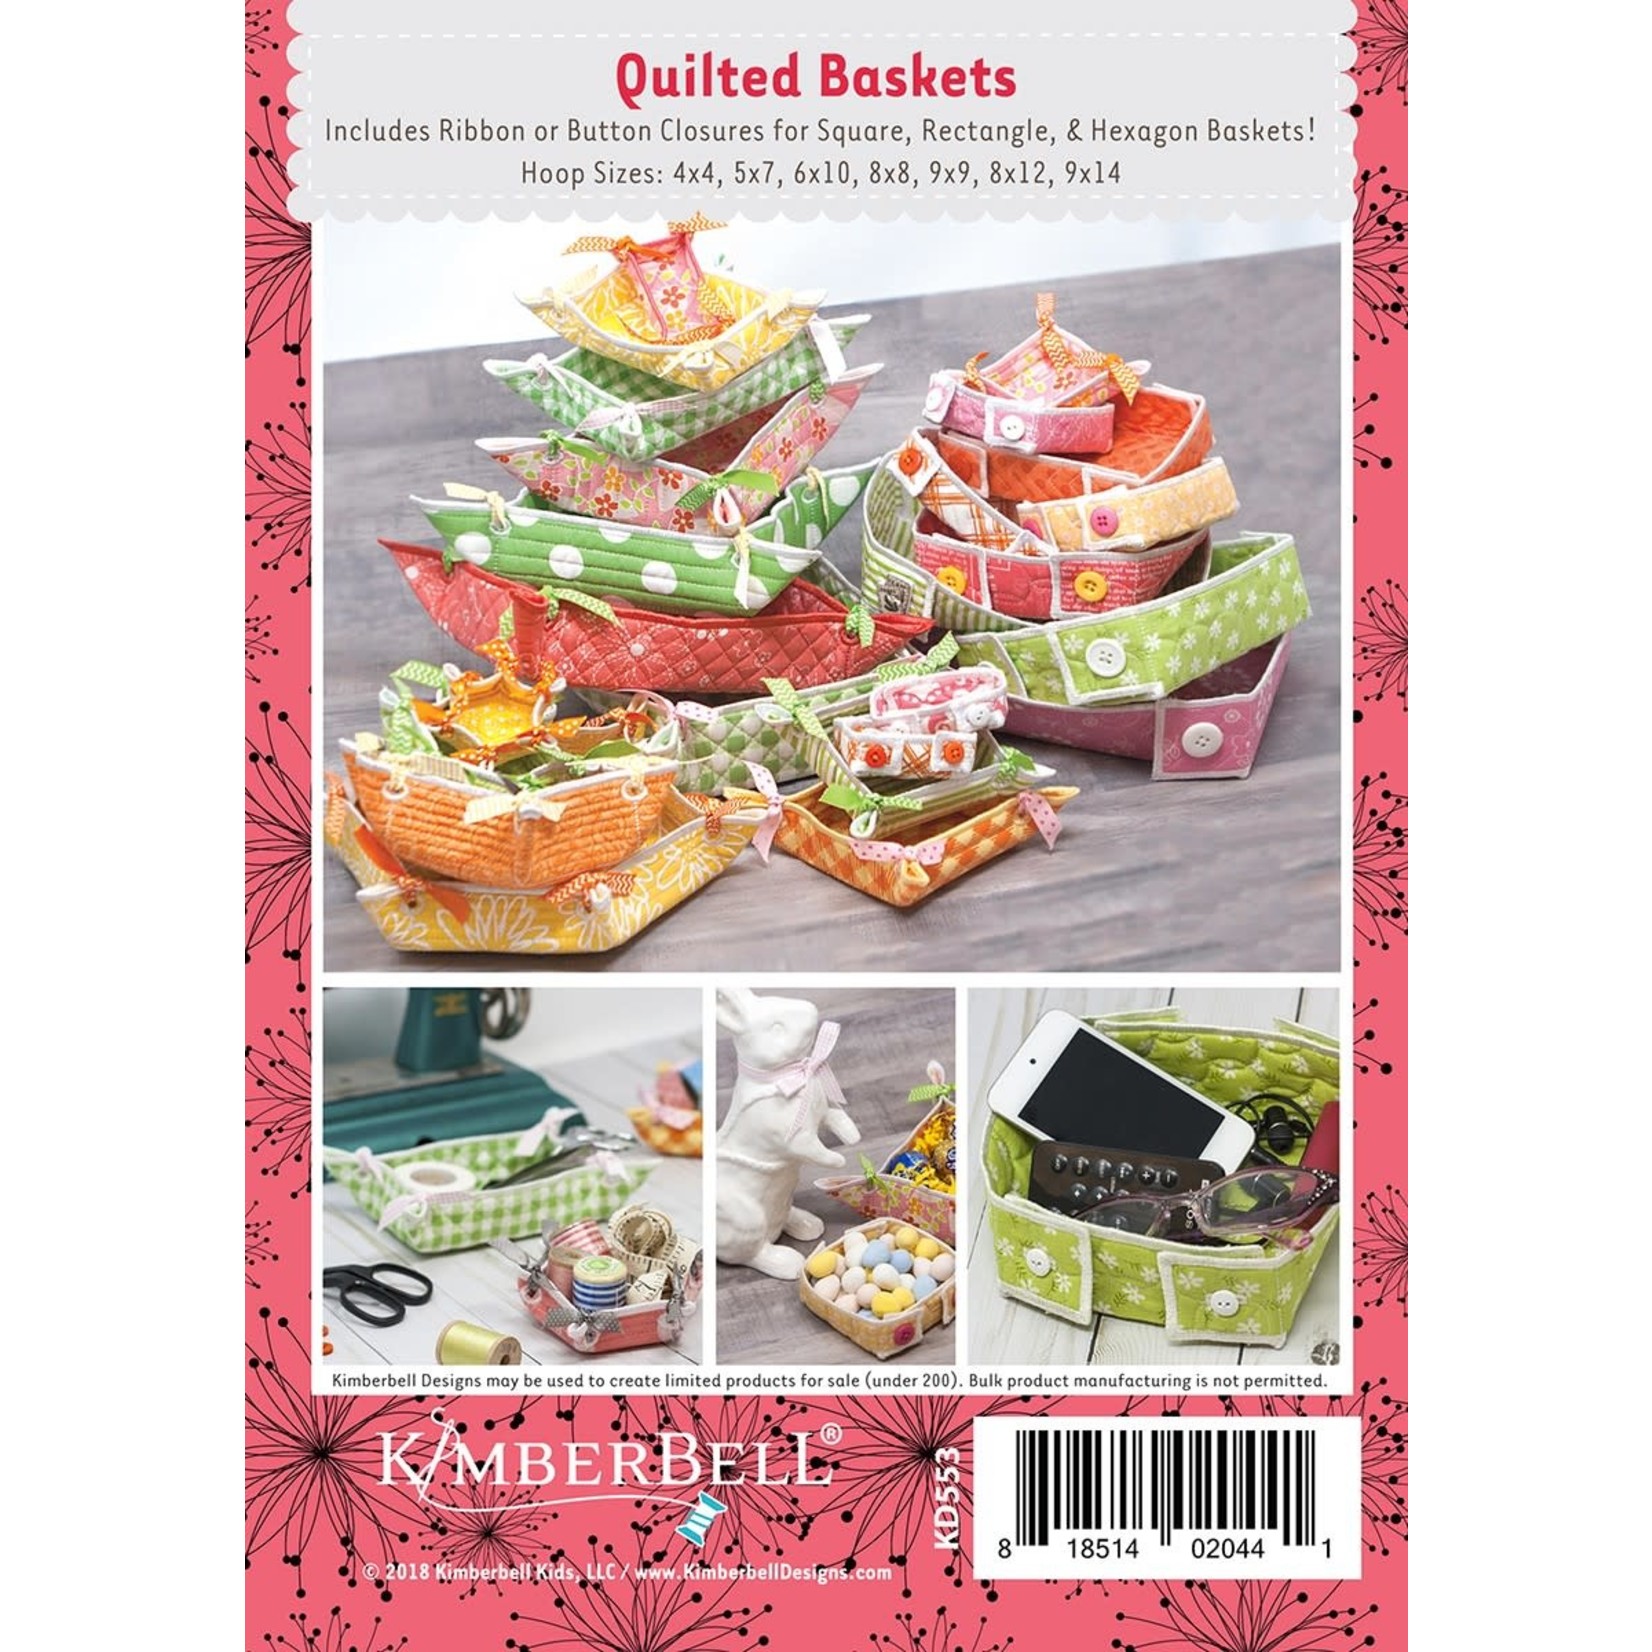 Kimberbell Designs Quilted Baskets Machine Embroidery CD